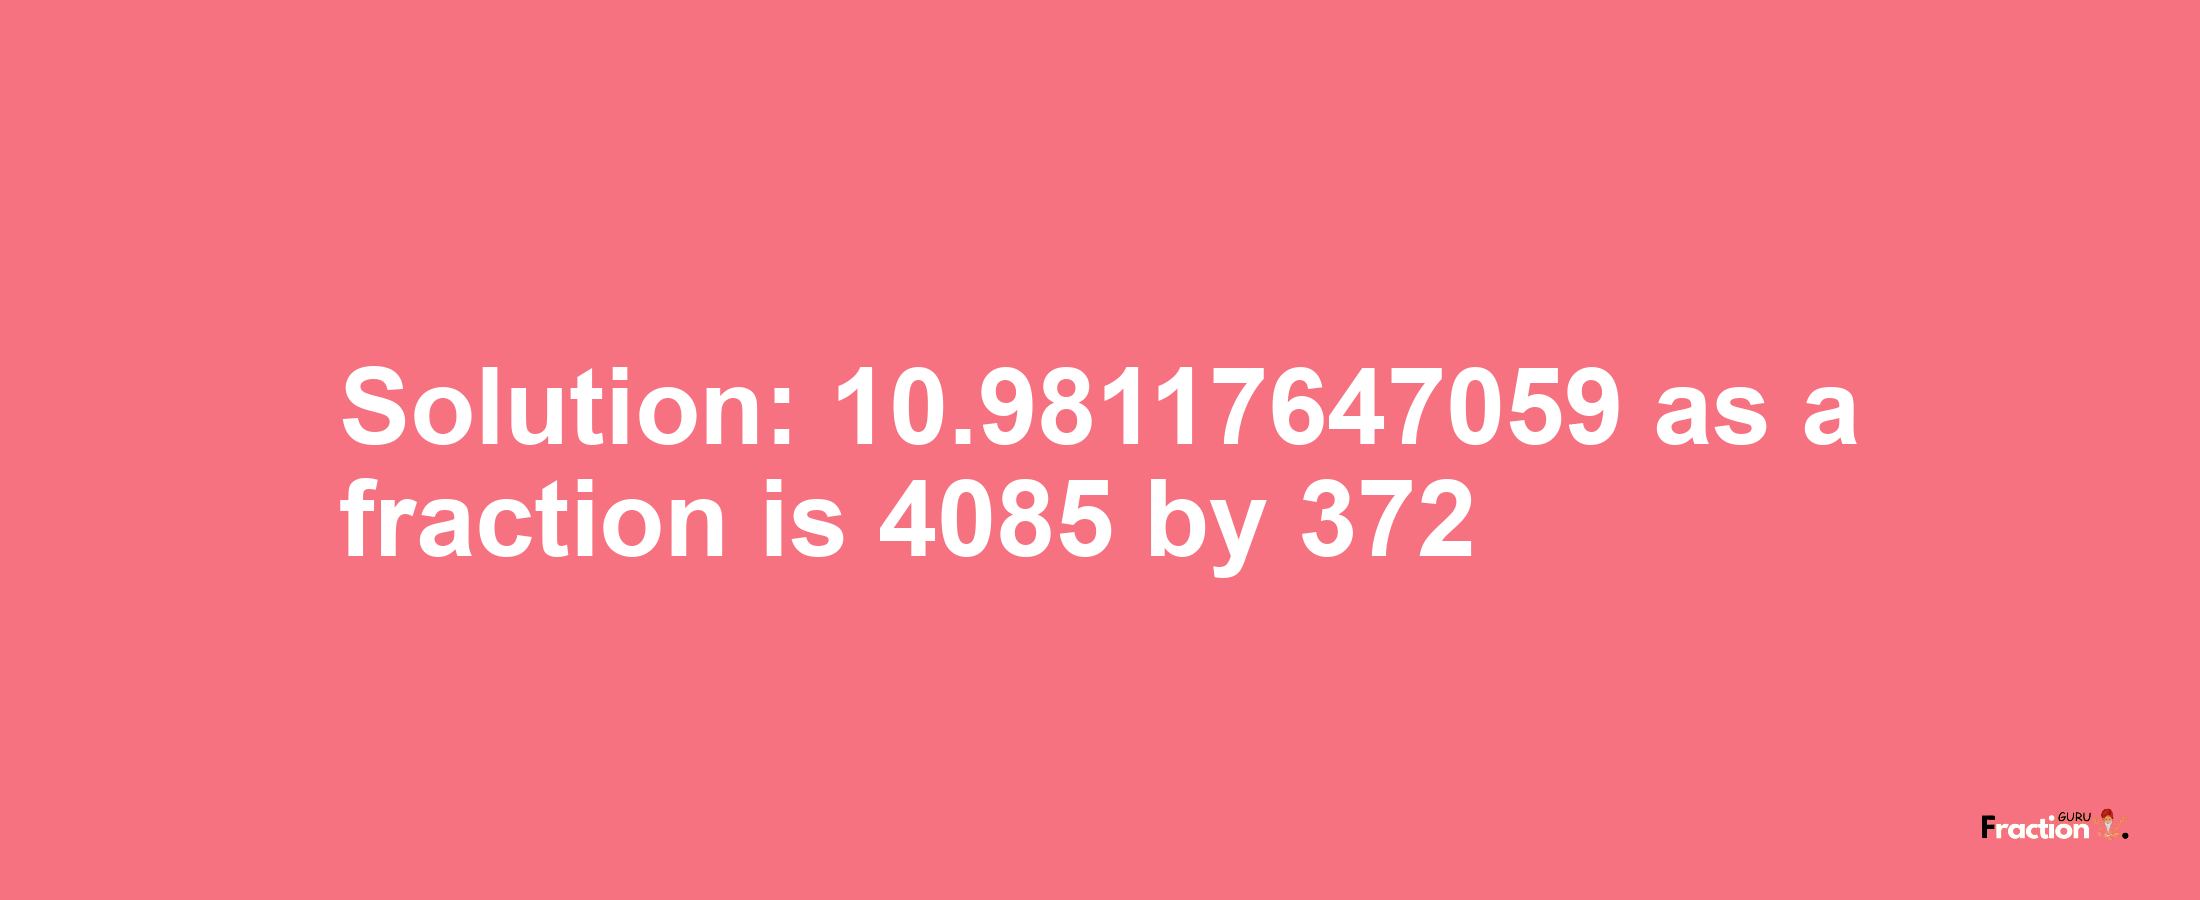 Solution:10.98117647059 as a fraction is 4085/372